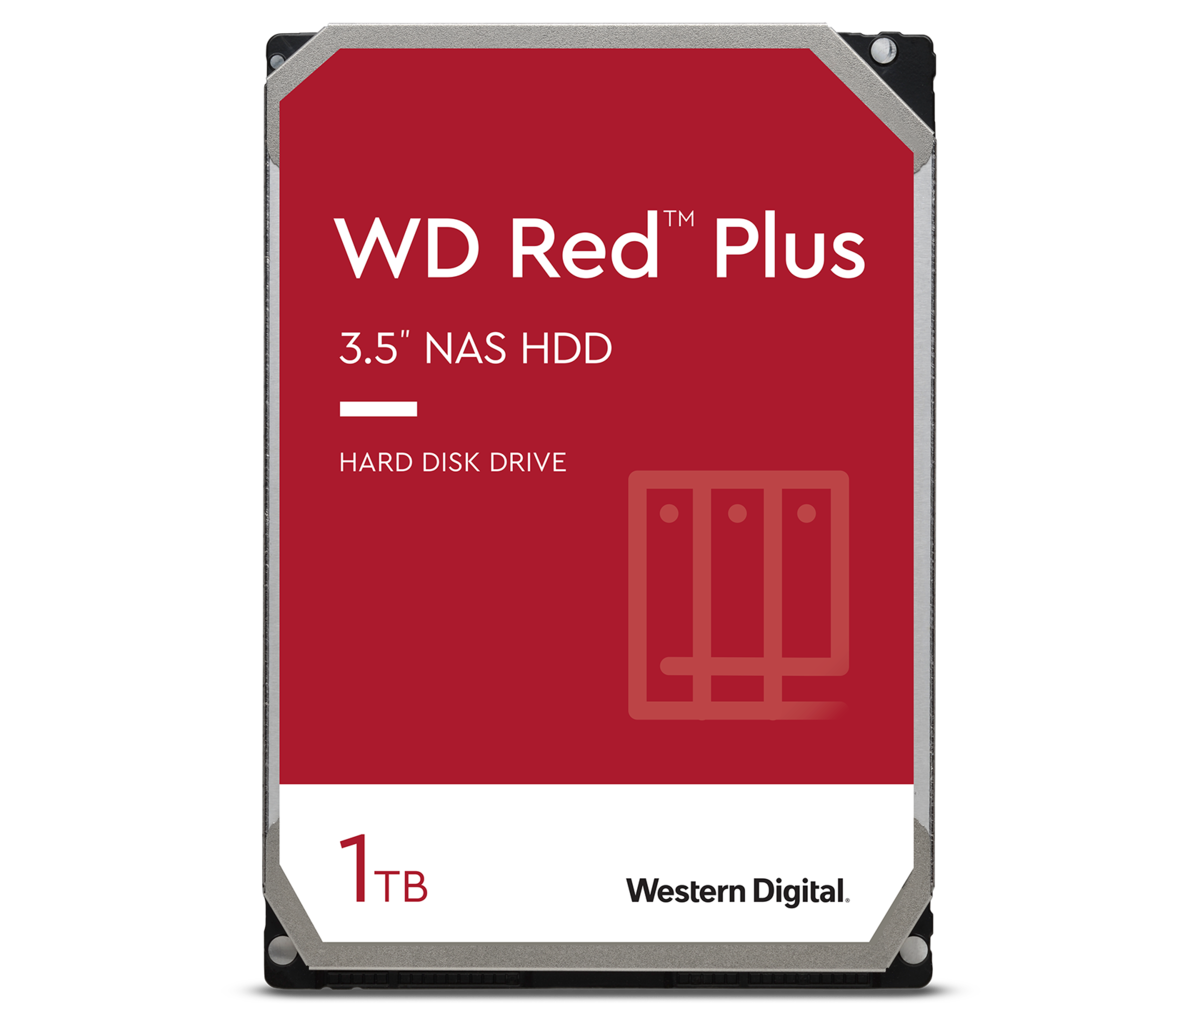 WD Red Plus 1TB NAS Hard Disk Drive - 5400 RPM 3.5